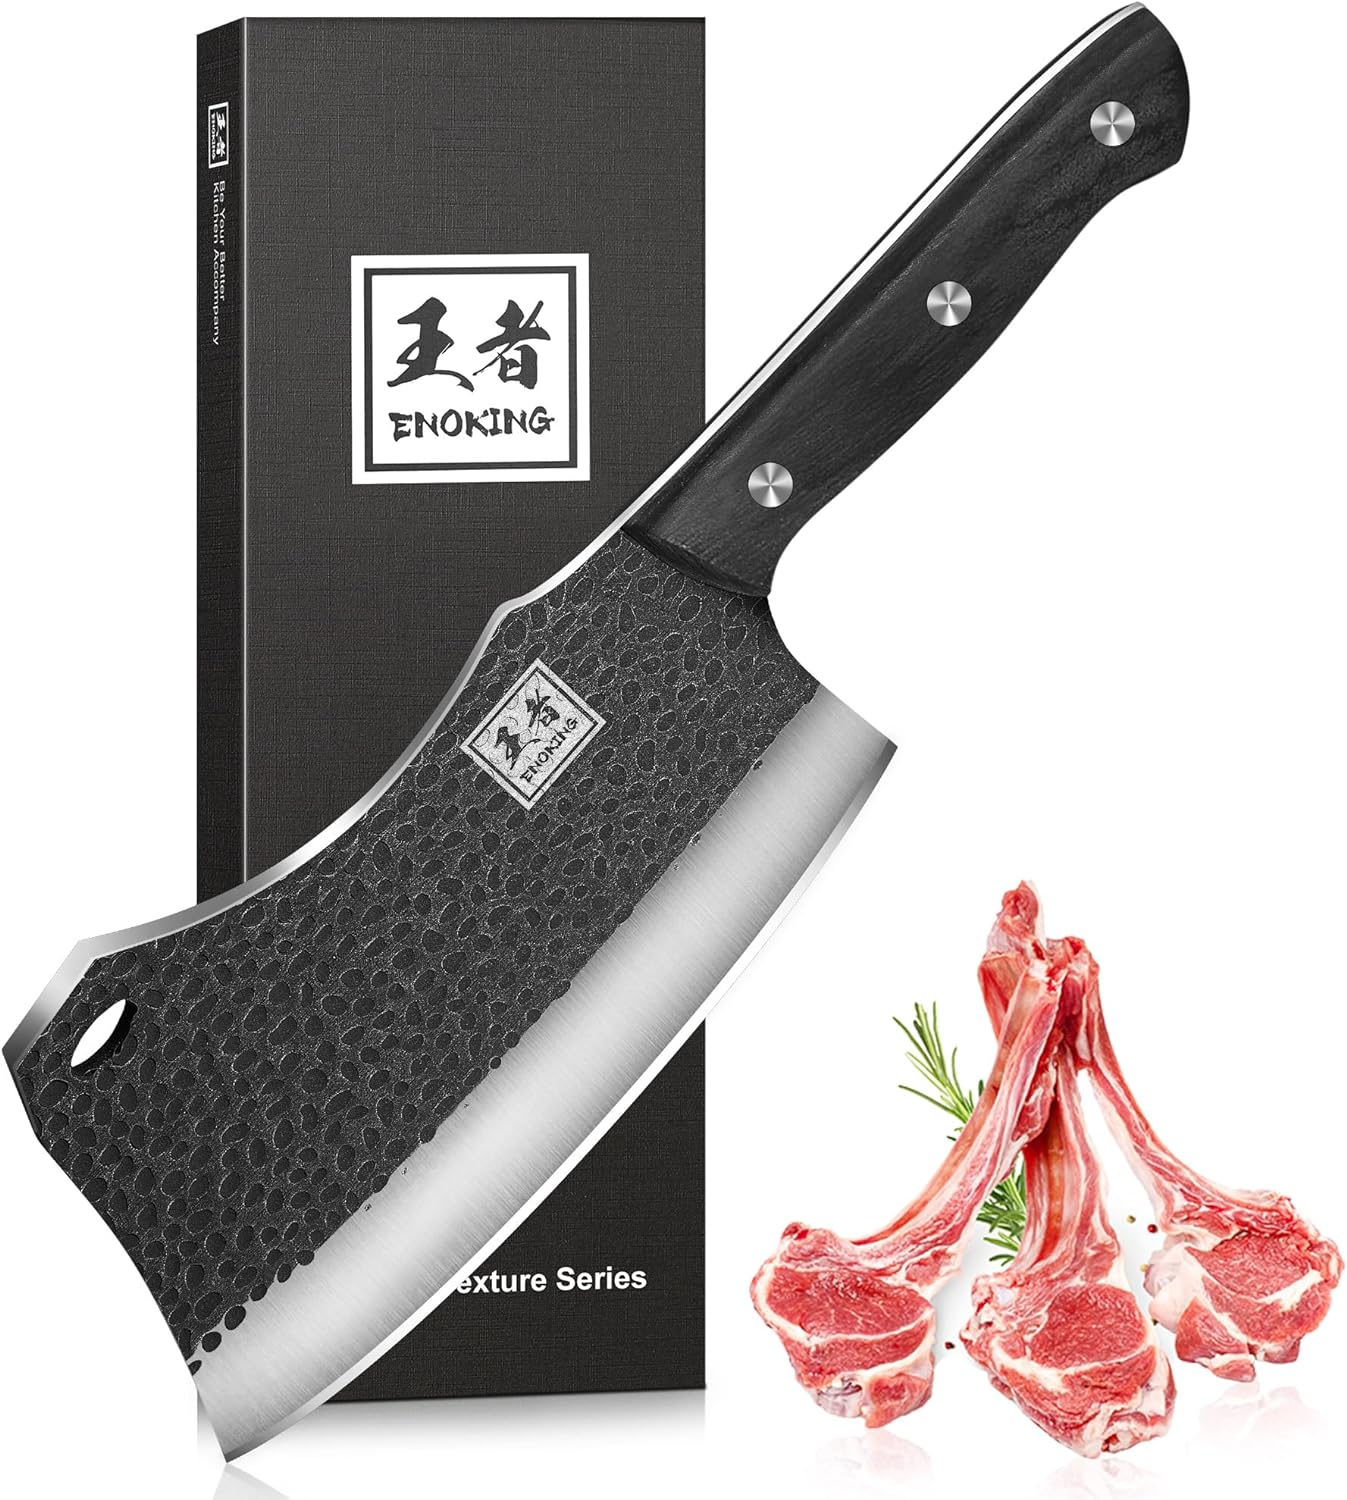 Came sharp, a nice heavy duty cleaver. good value.